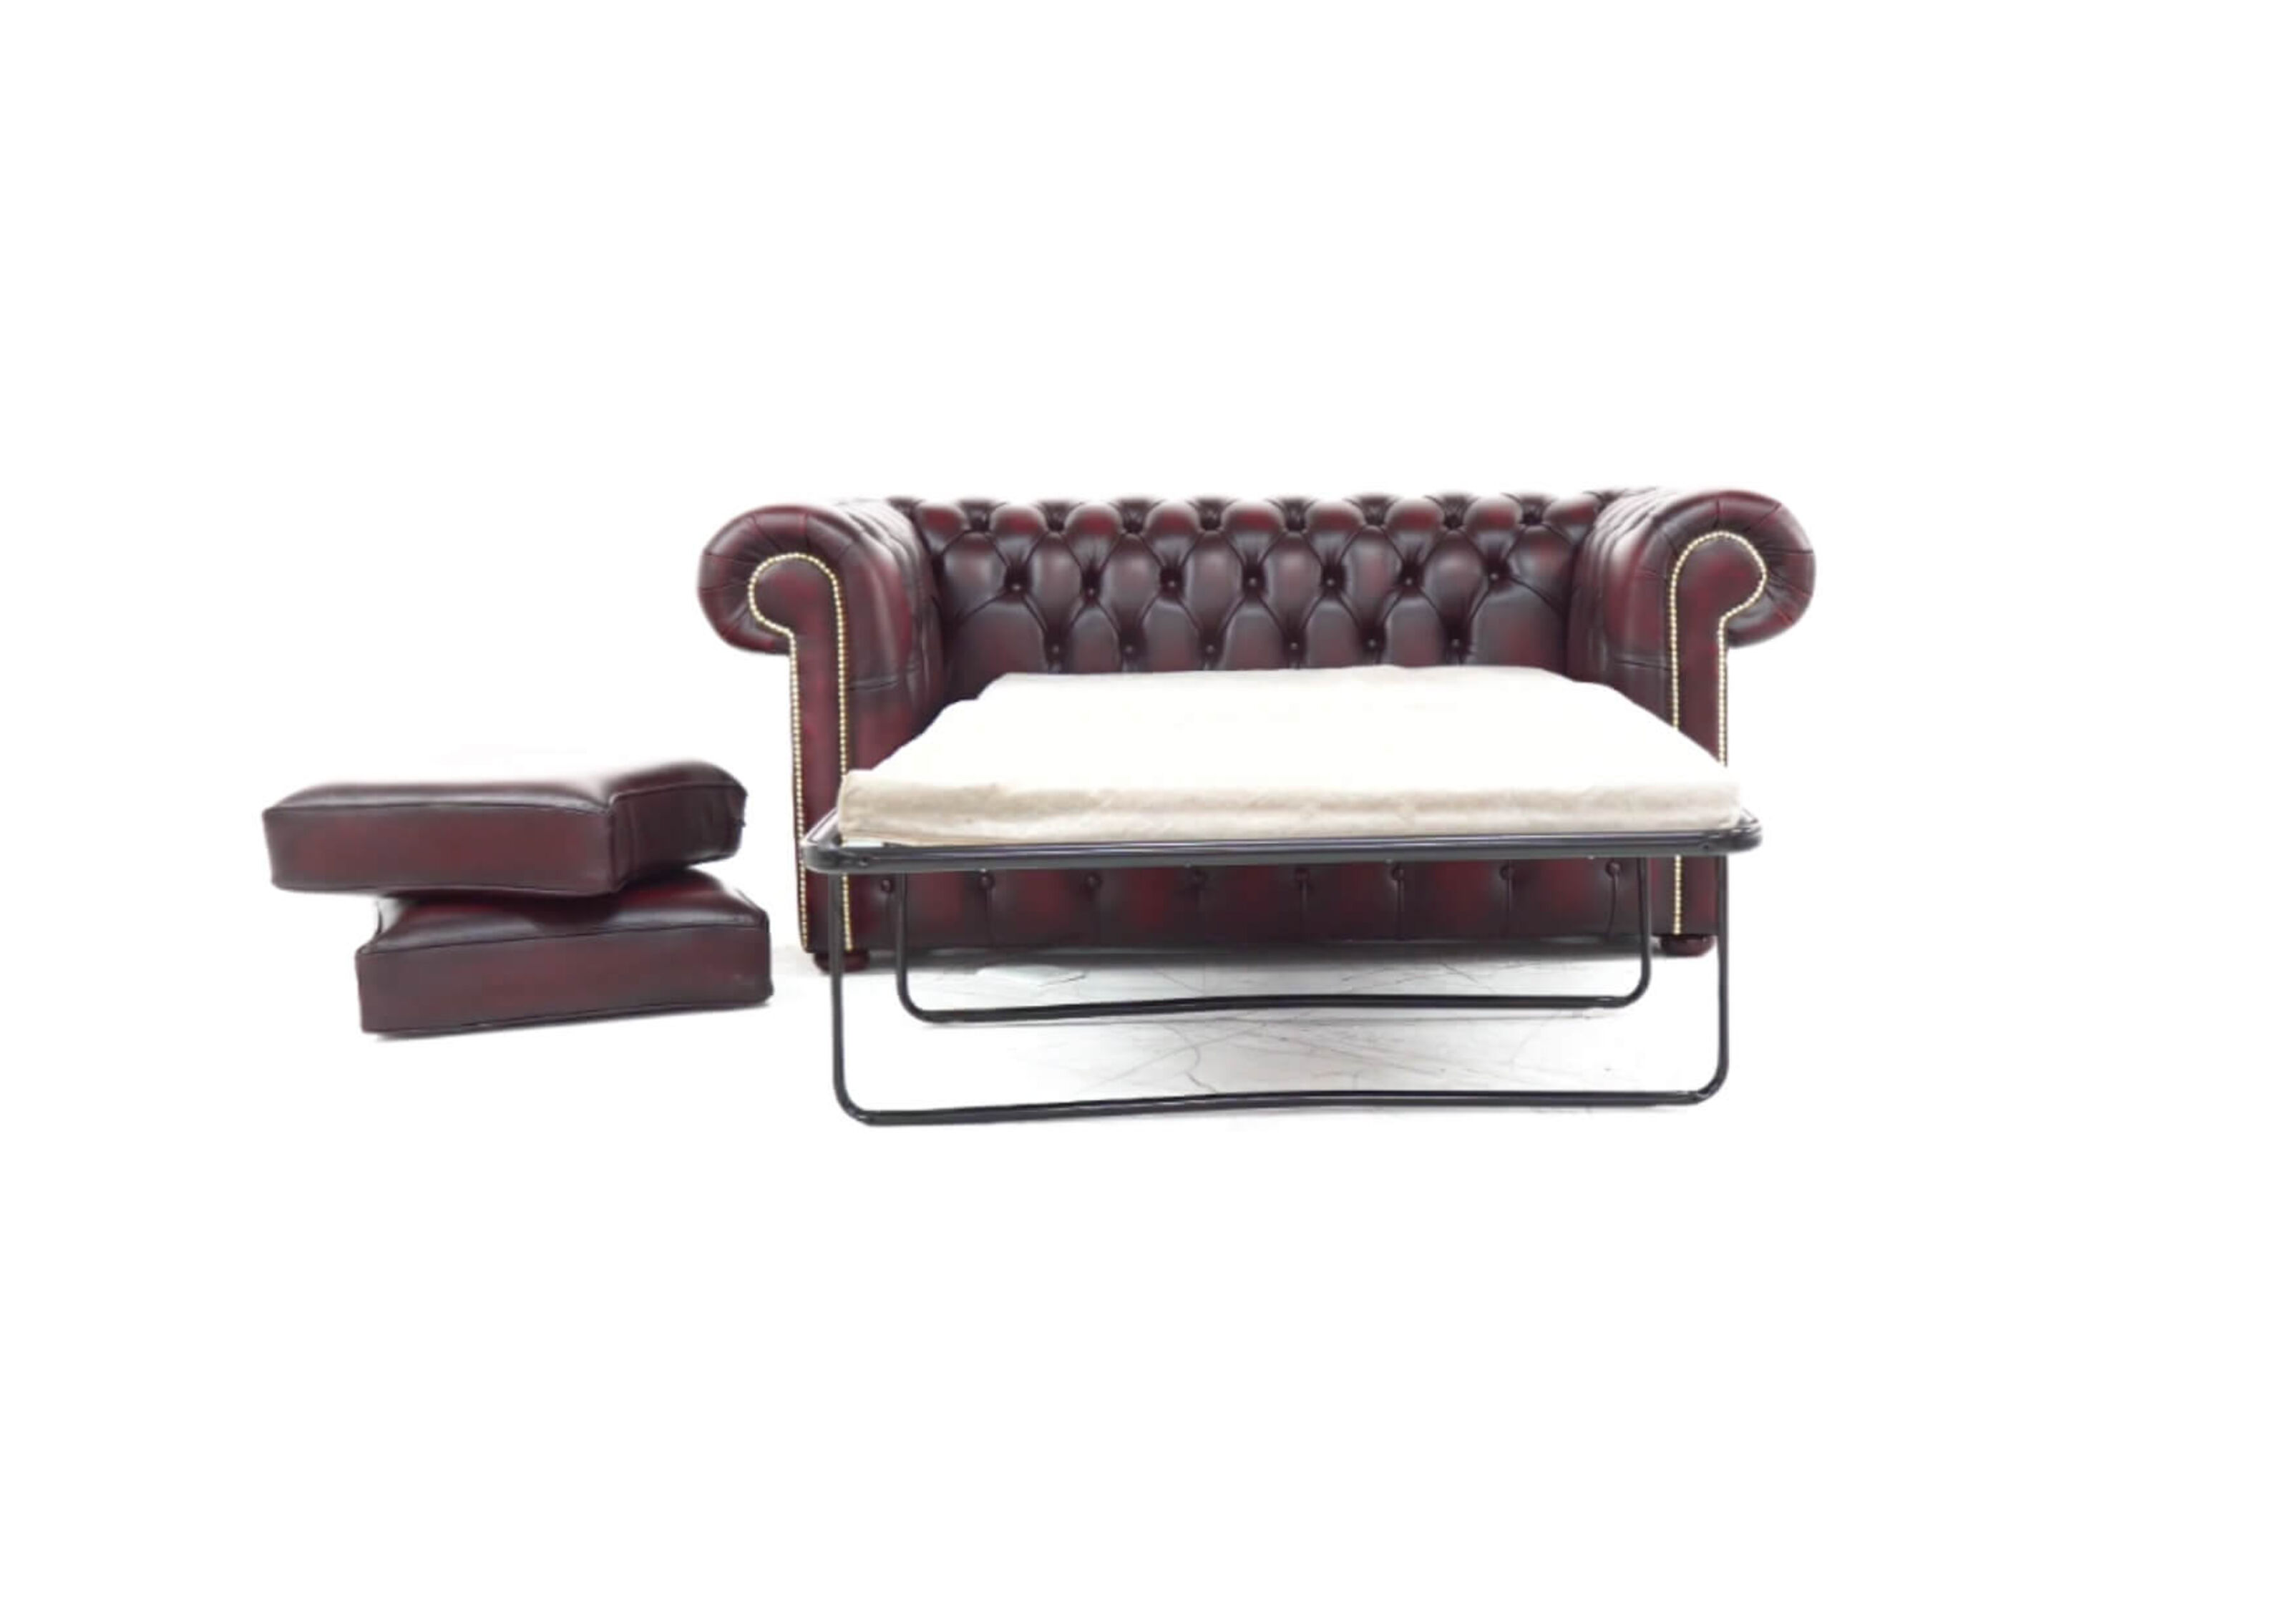 Dual-Purpose Design: Chesterfield Sofas with Hidden Bed Functionality  %Post Title